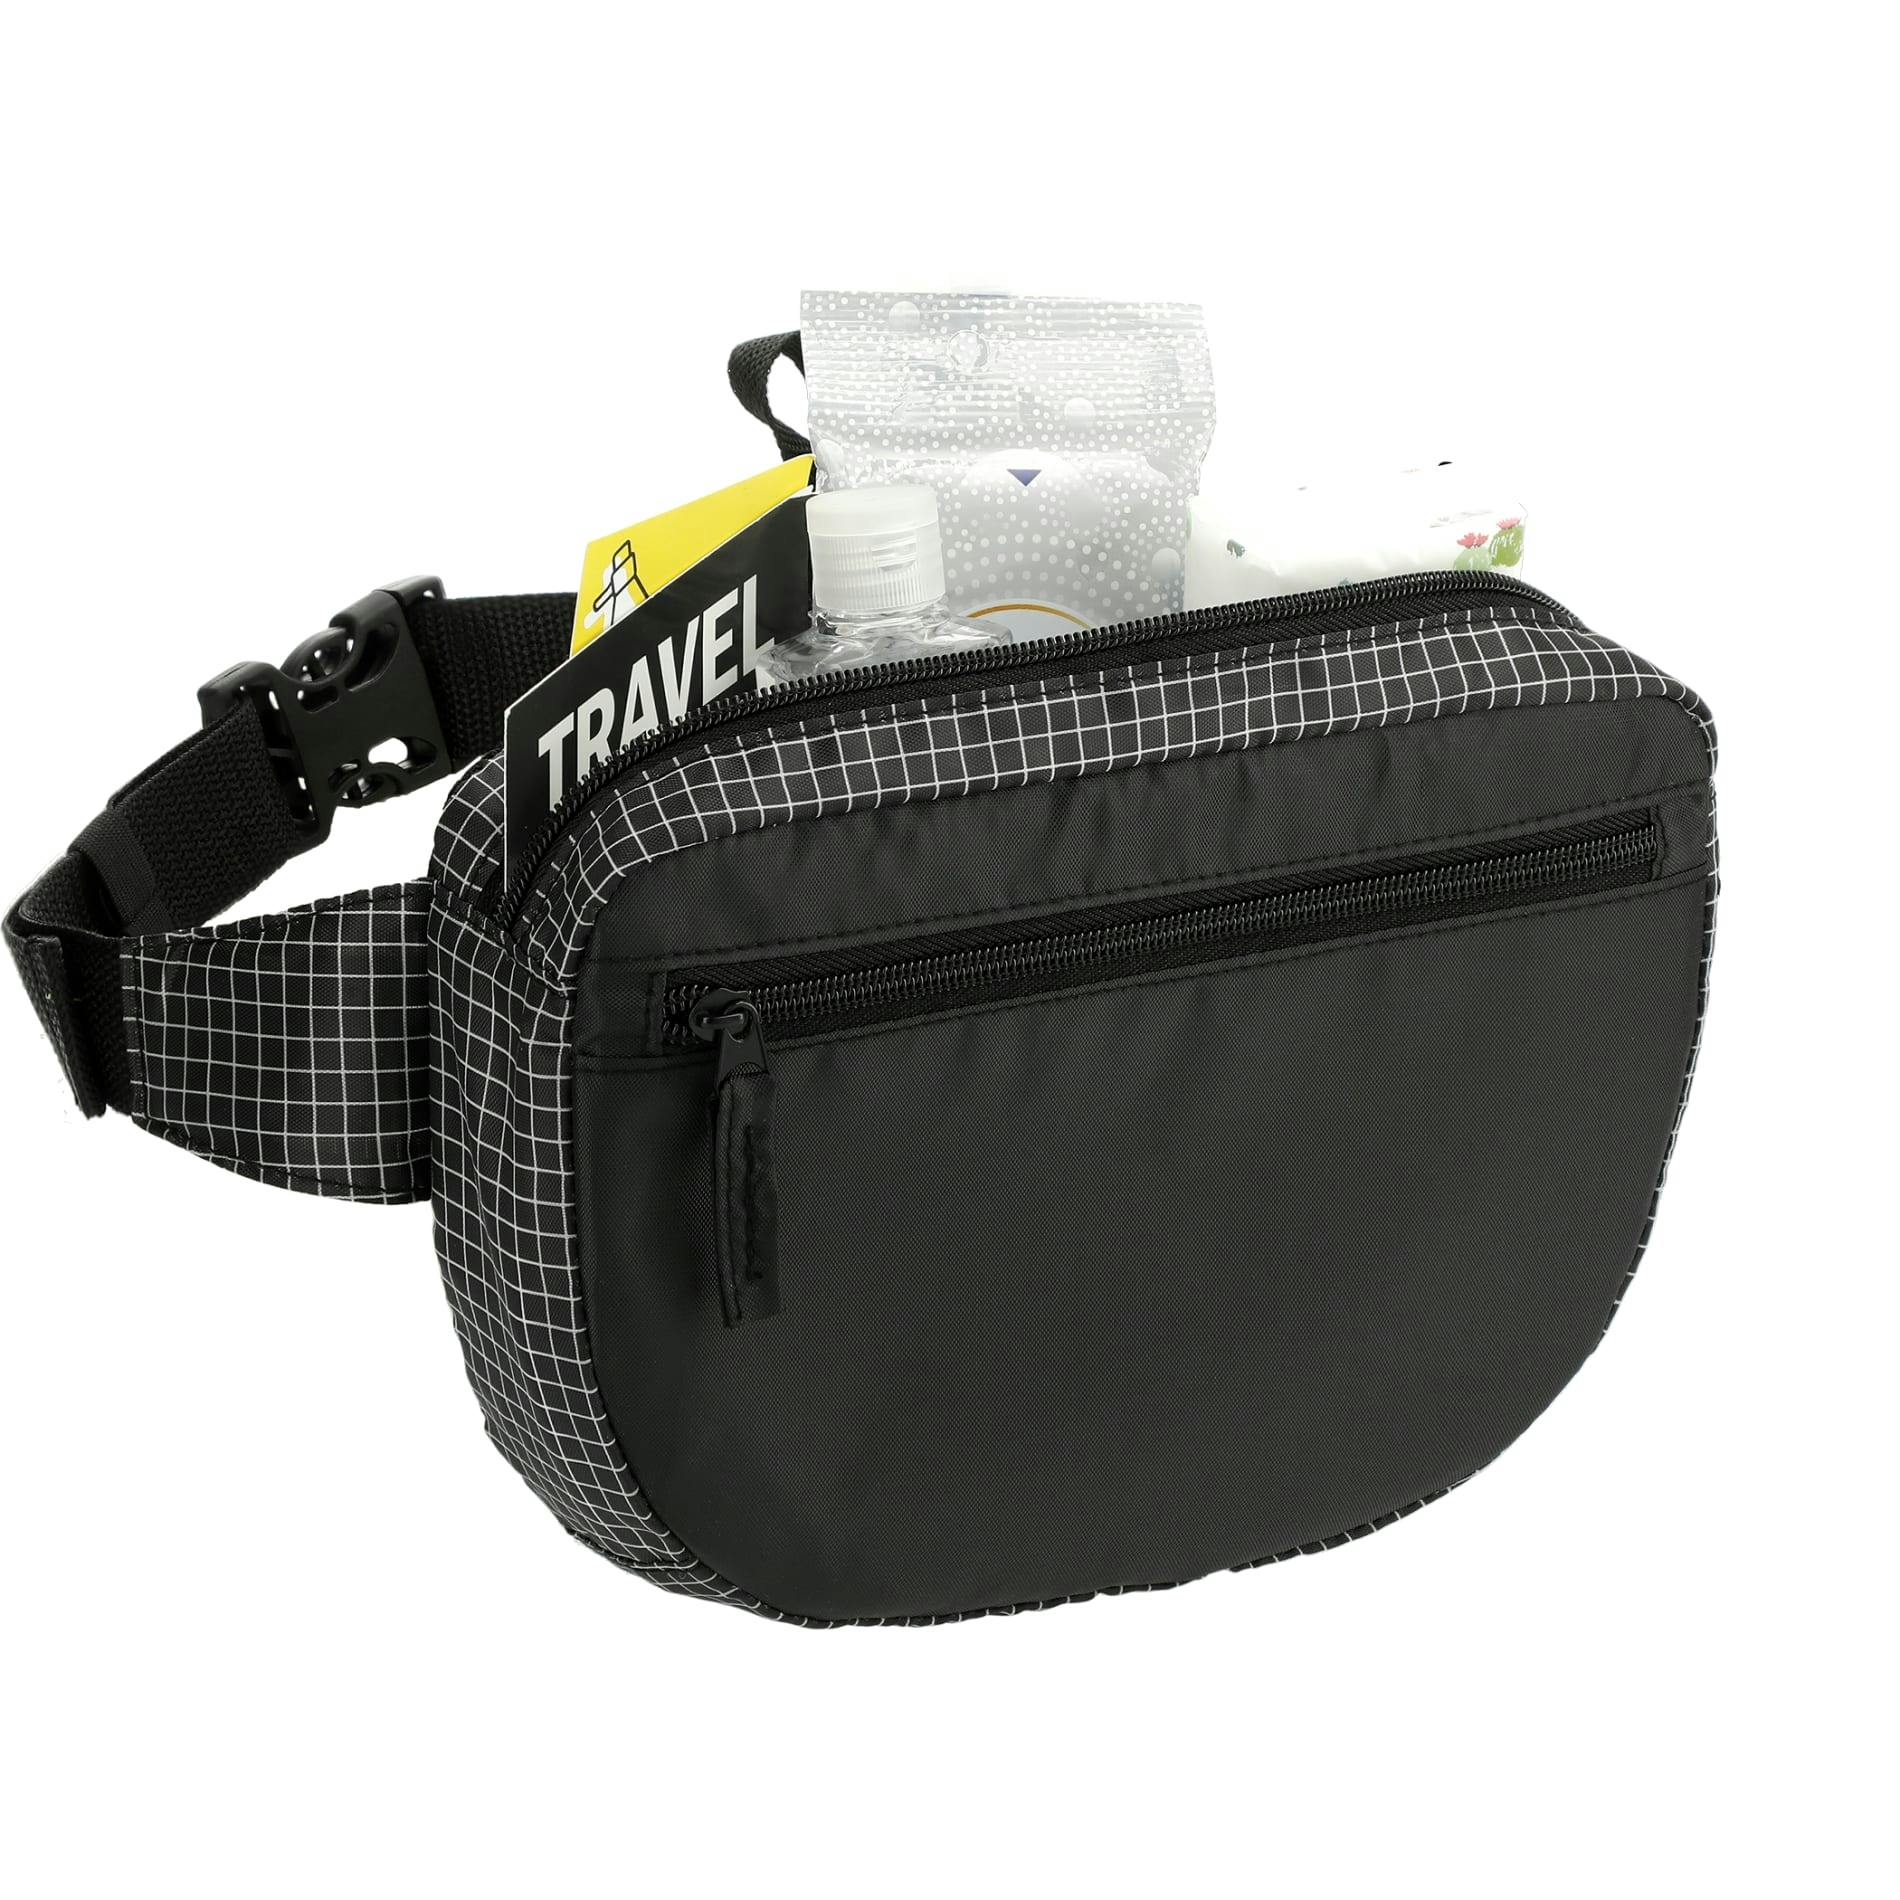 Grid Fanny Pack - additional Image 1